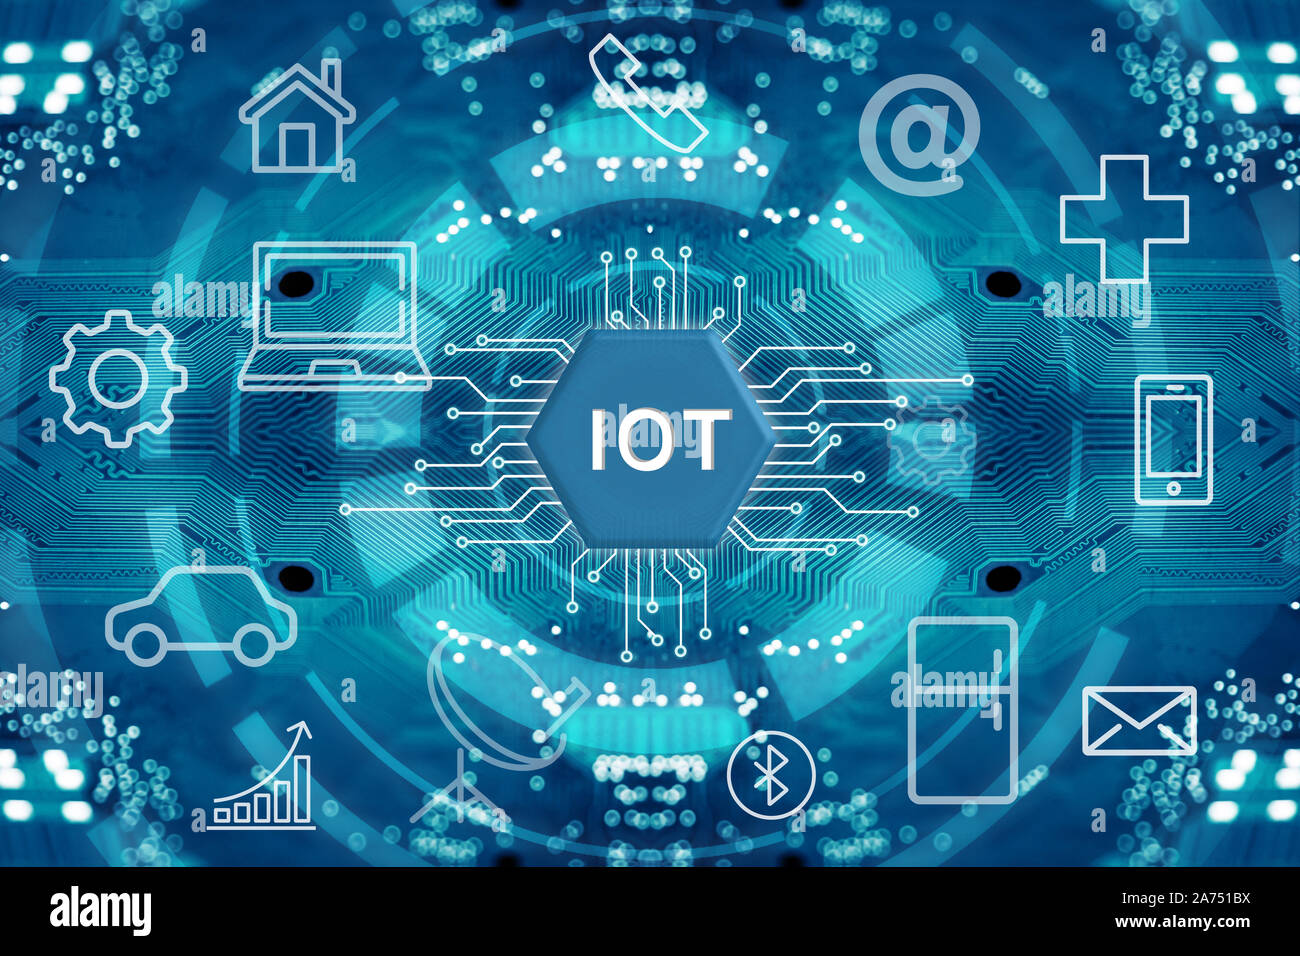 Internet of things, wireless communication network, abstract image visual. Stock Photo